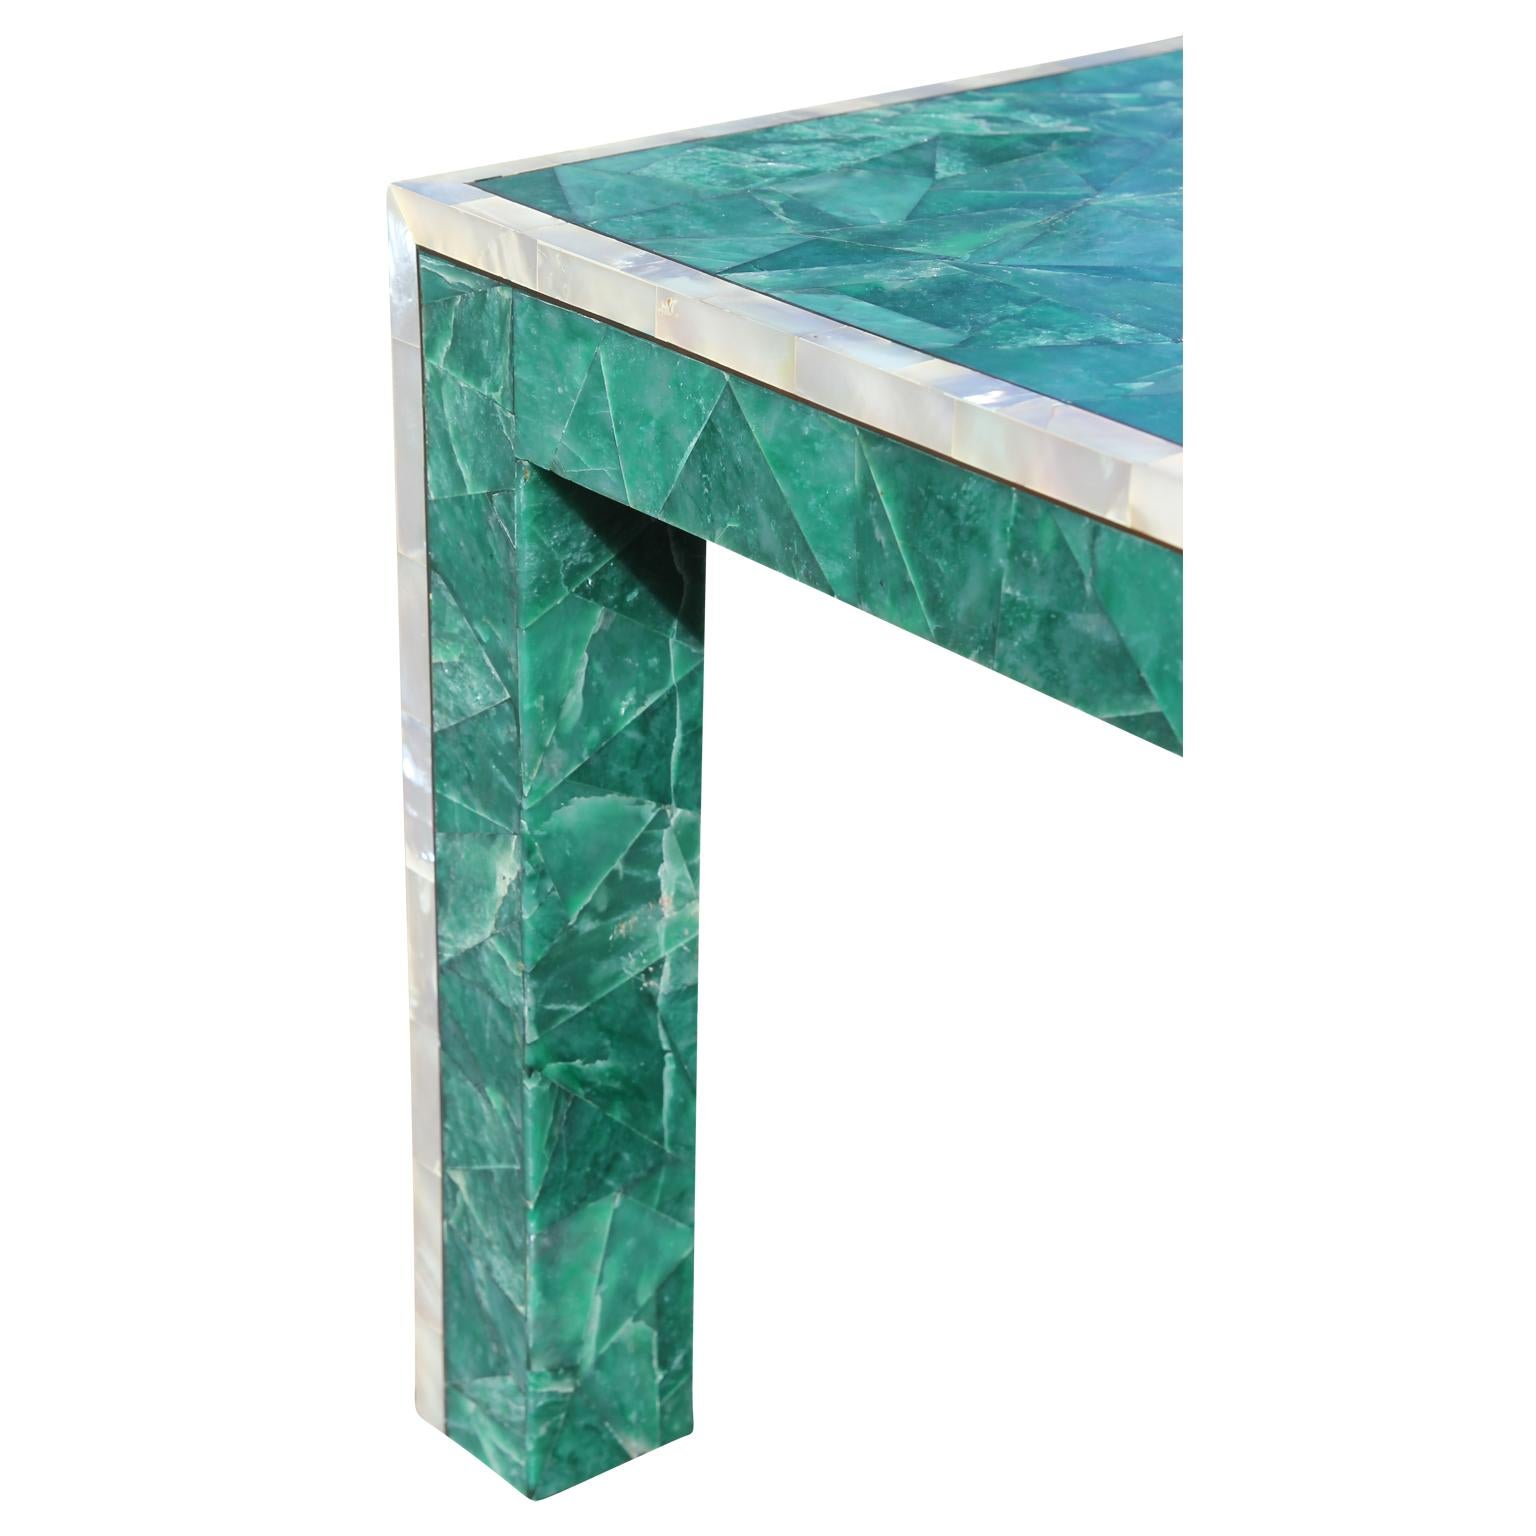 Late 20th Century Pair of Modern Square Tessellated Green Nephrite 'Malachite' Side Tables